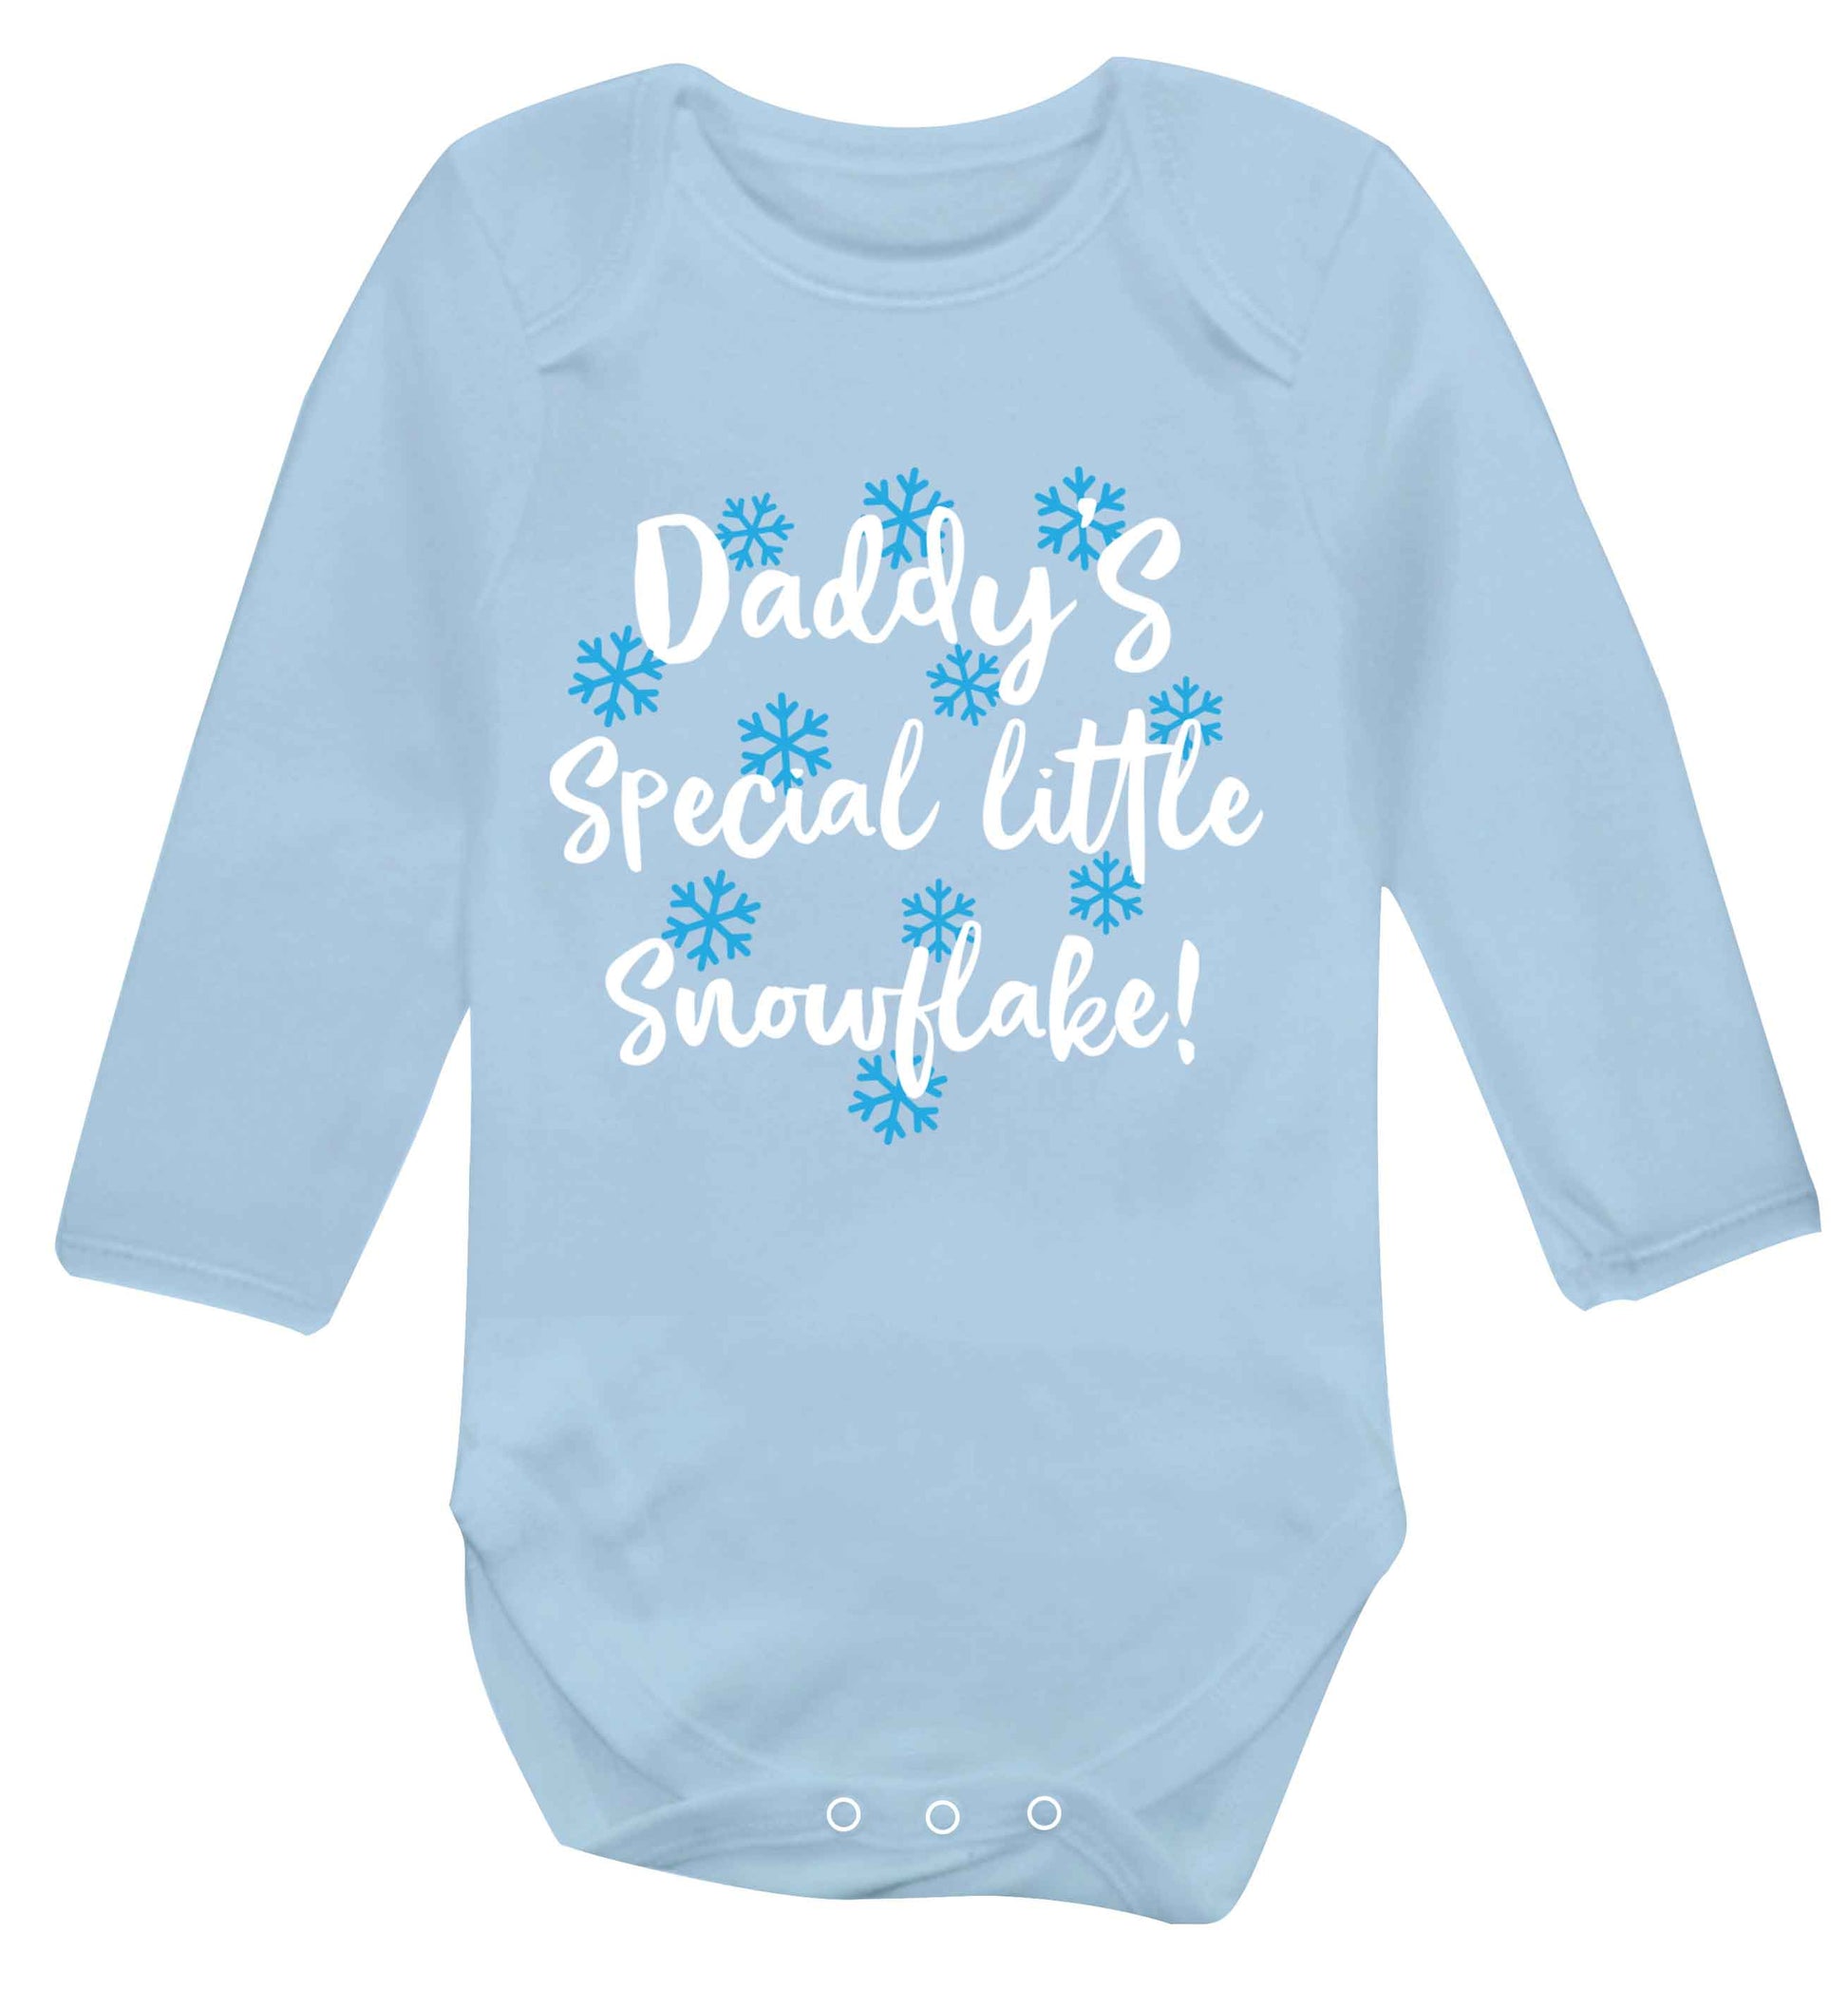 Daddy's special little snowflake Baby Vest long sleeved pale blue 6-12 months